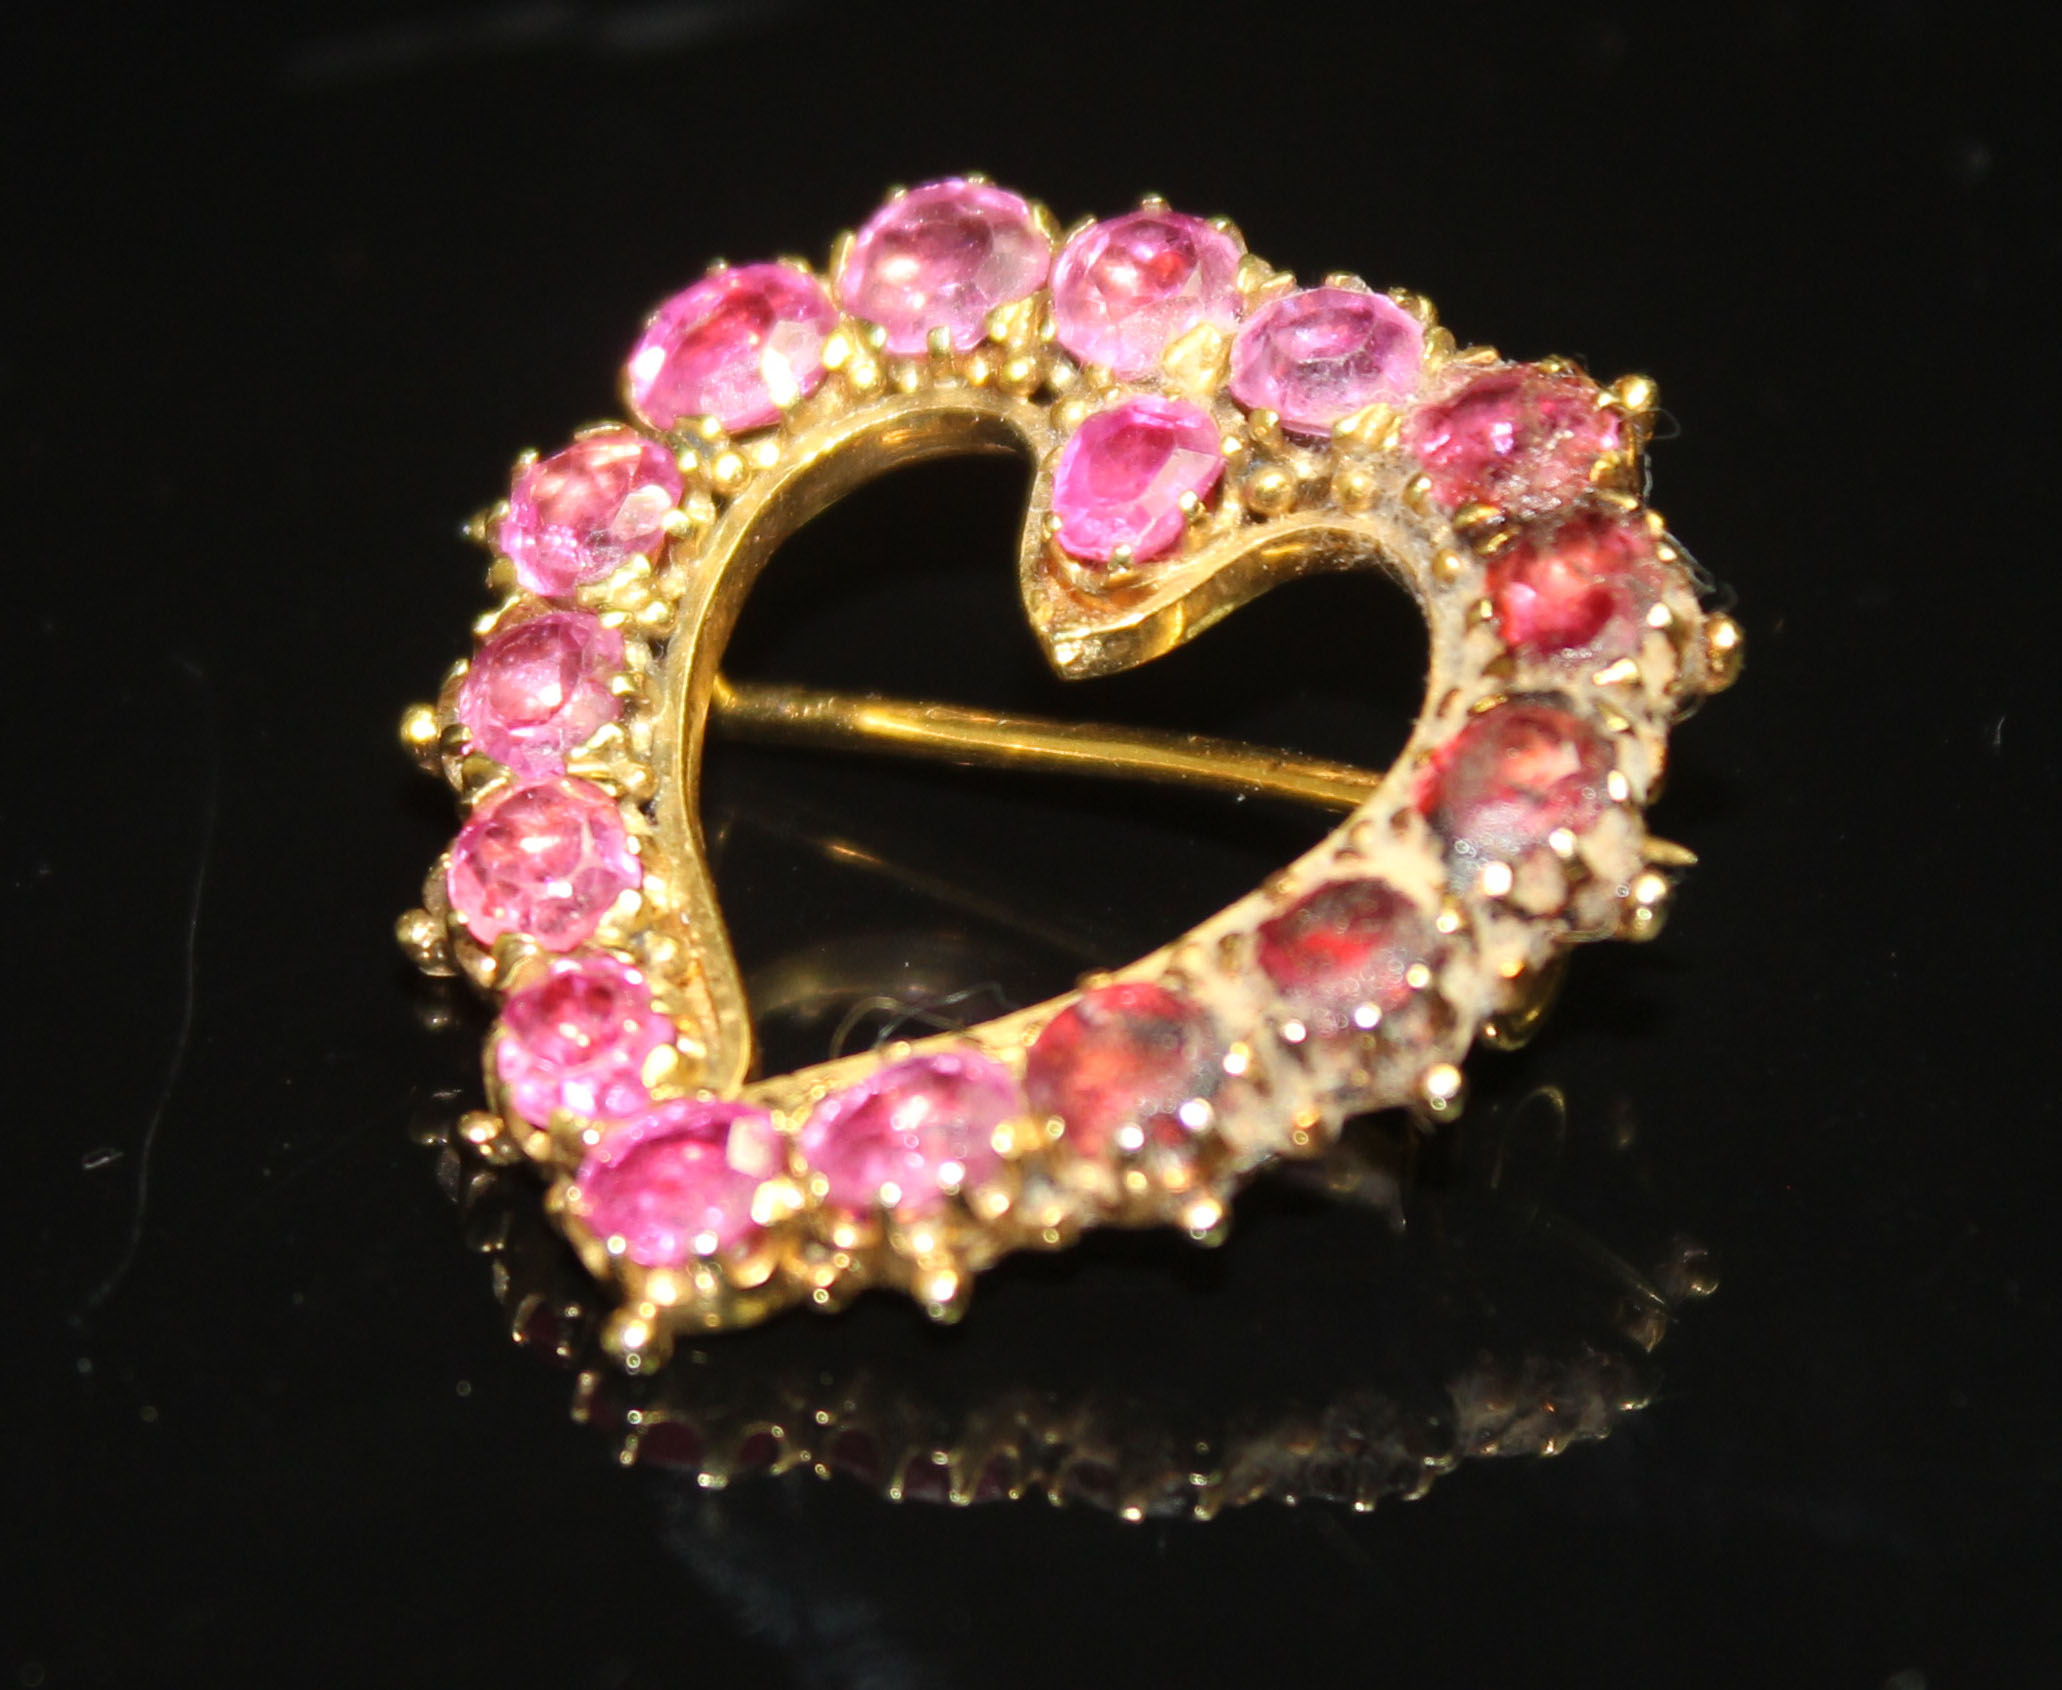 A 19TH CENTURY RUBY HEART BROOCH of yellow metal and open form. Set throughout with circular-cut